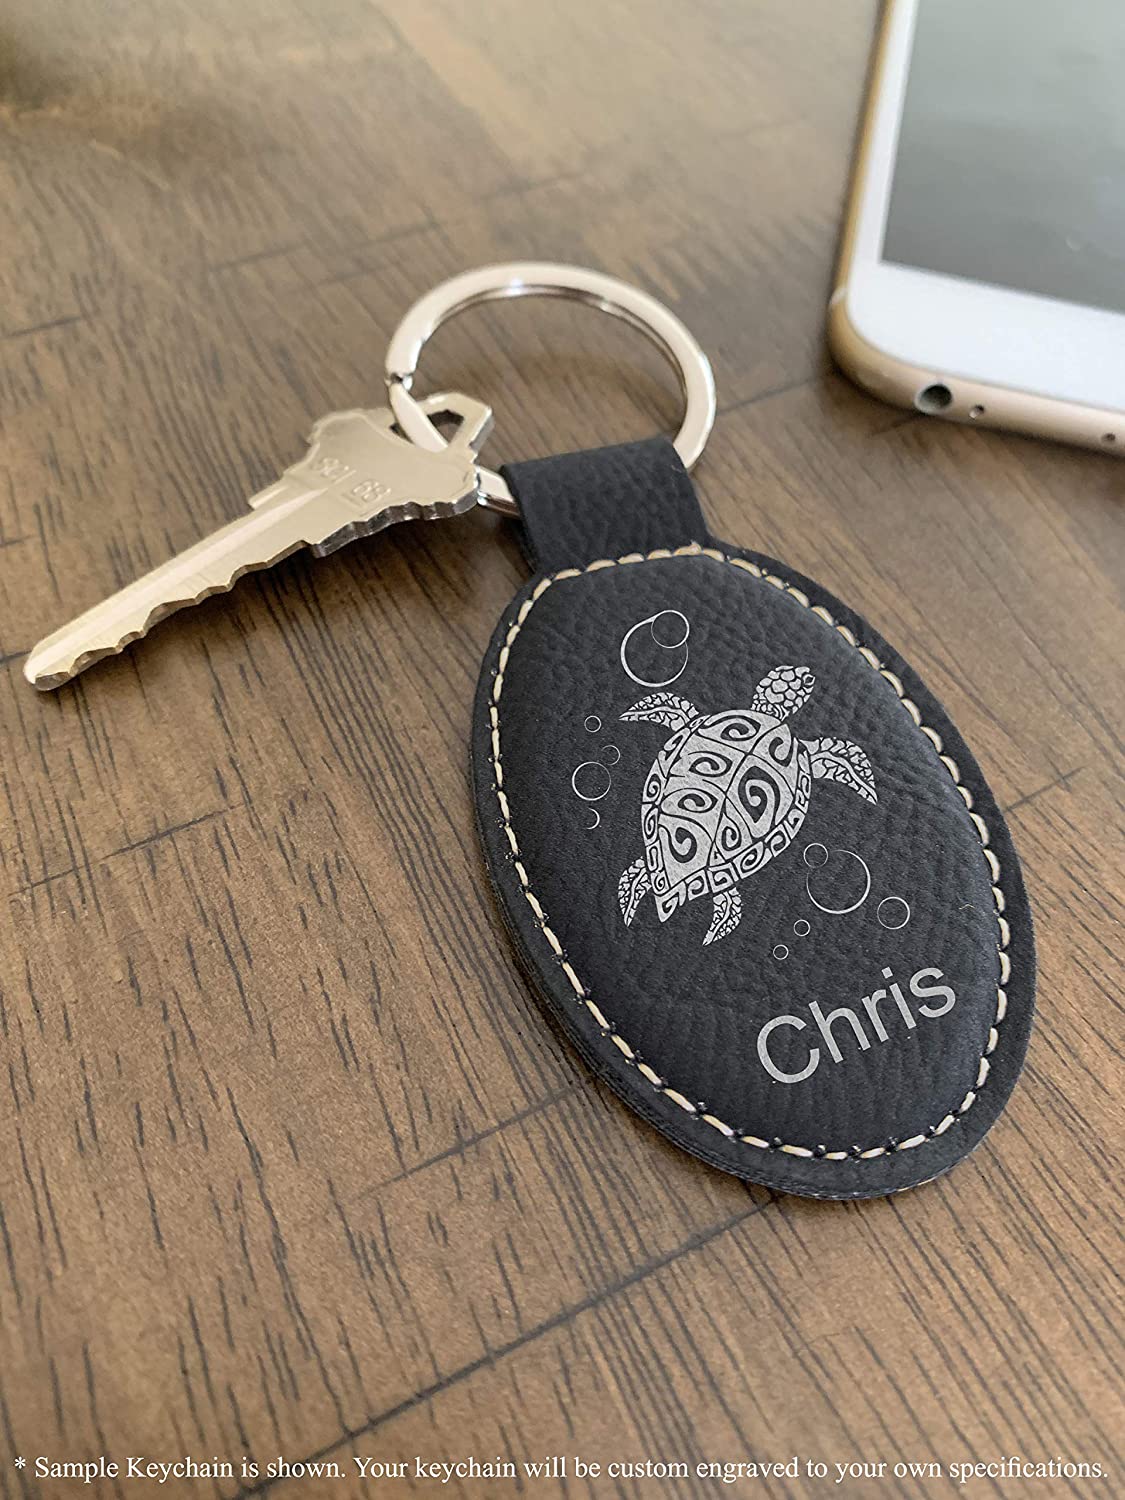 Faux Leather Oval Keychain, Police Car, Personalized Engraving Included